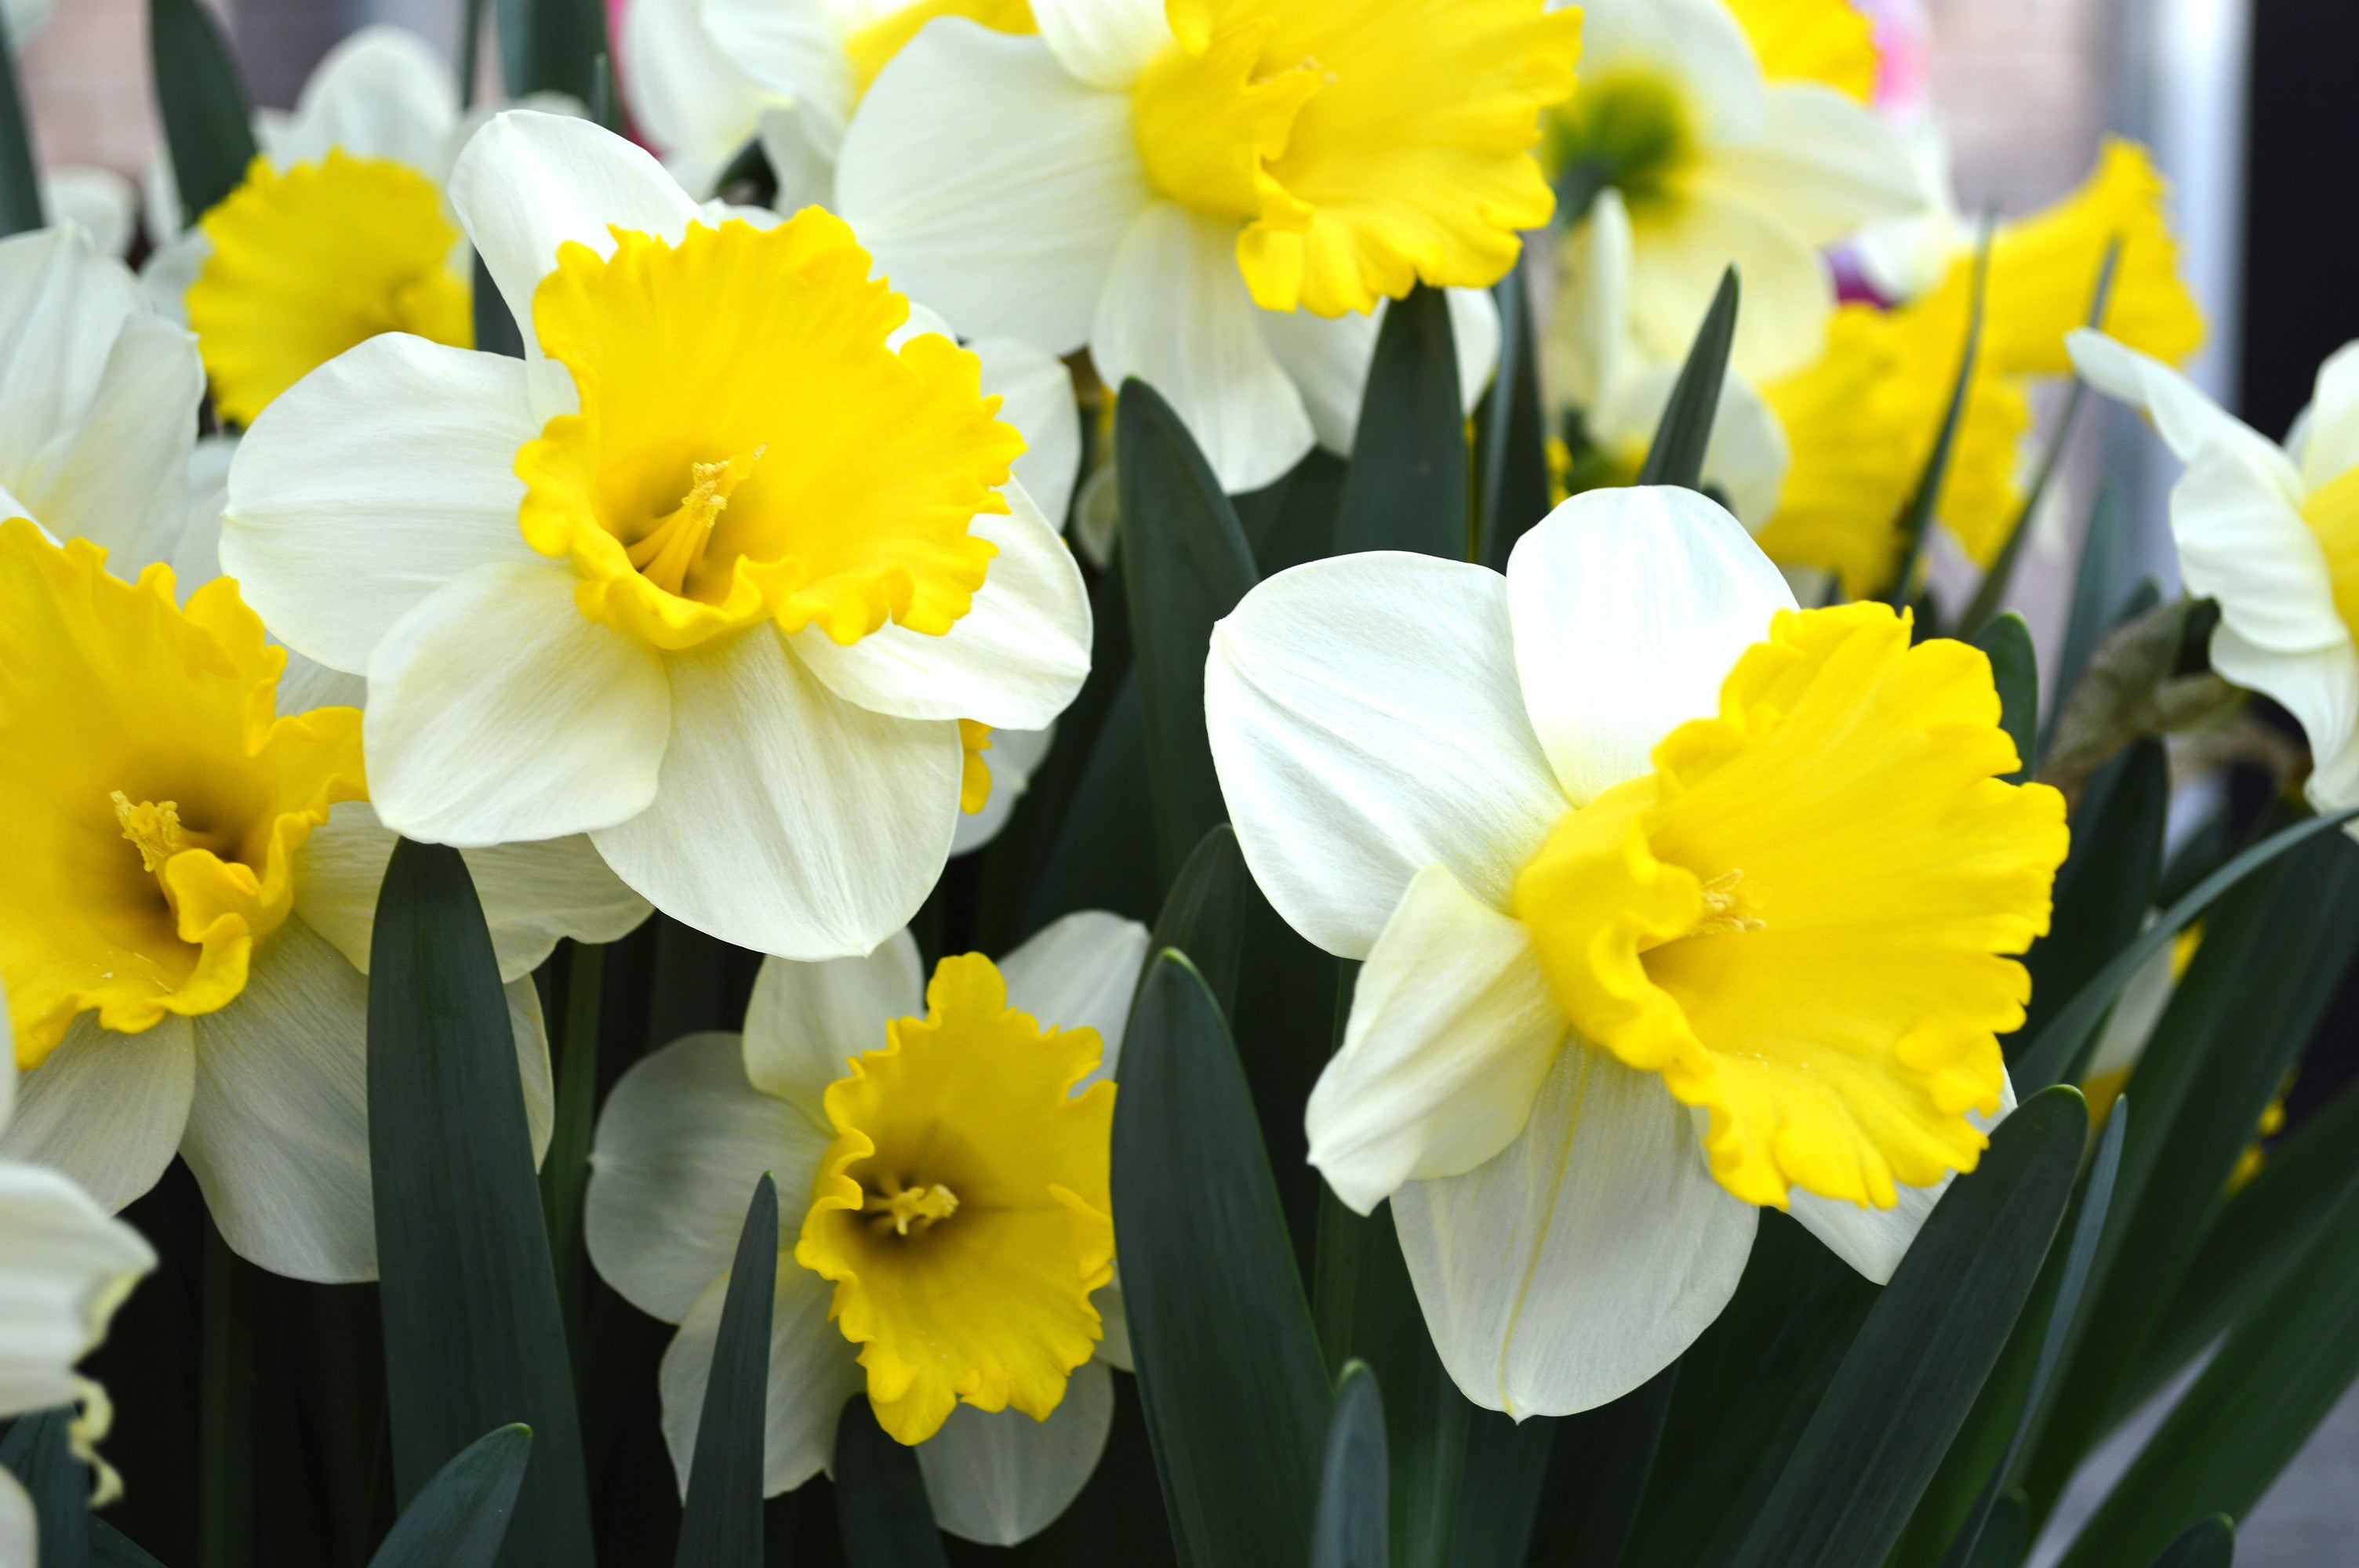 Daffodils from January to April - The Real Dirt Blog - ANR Blogs